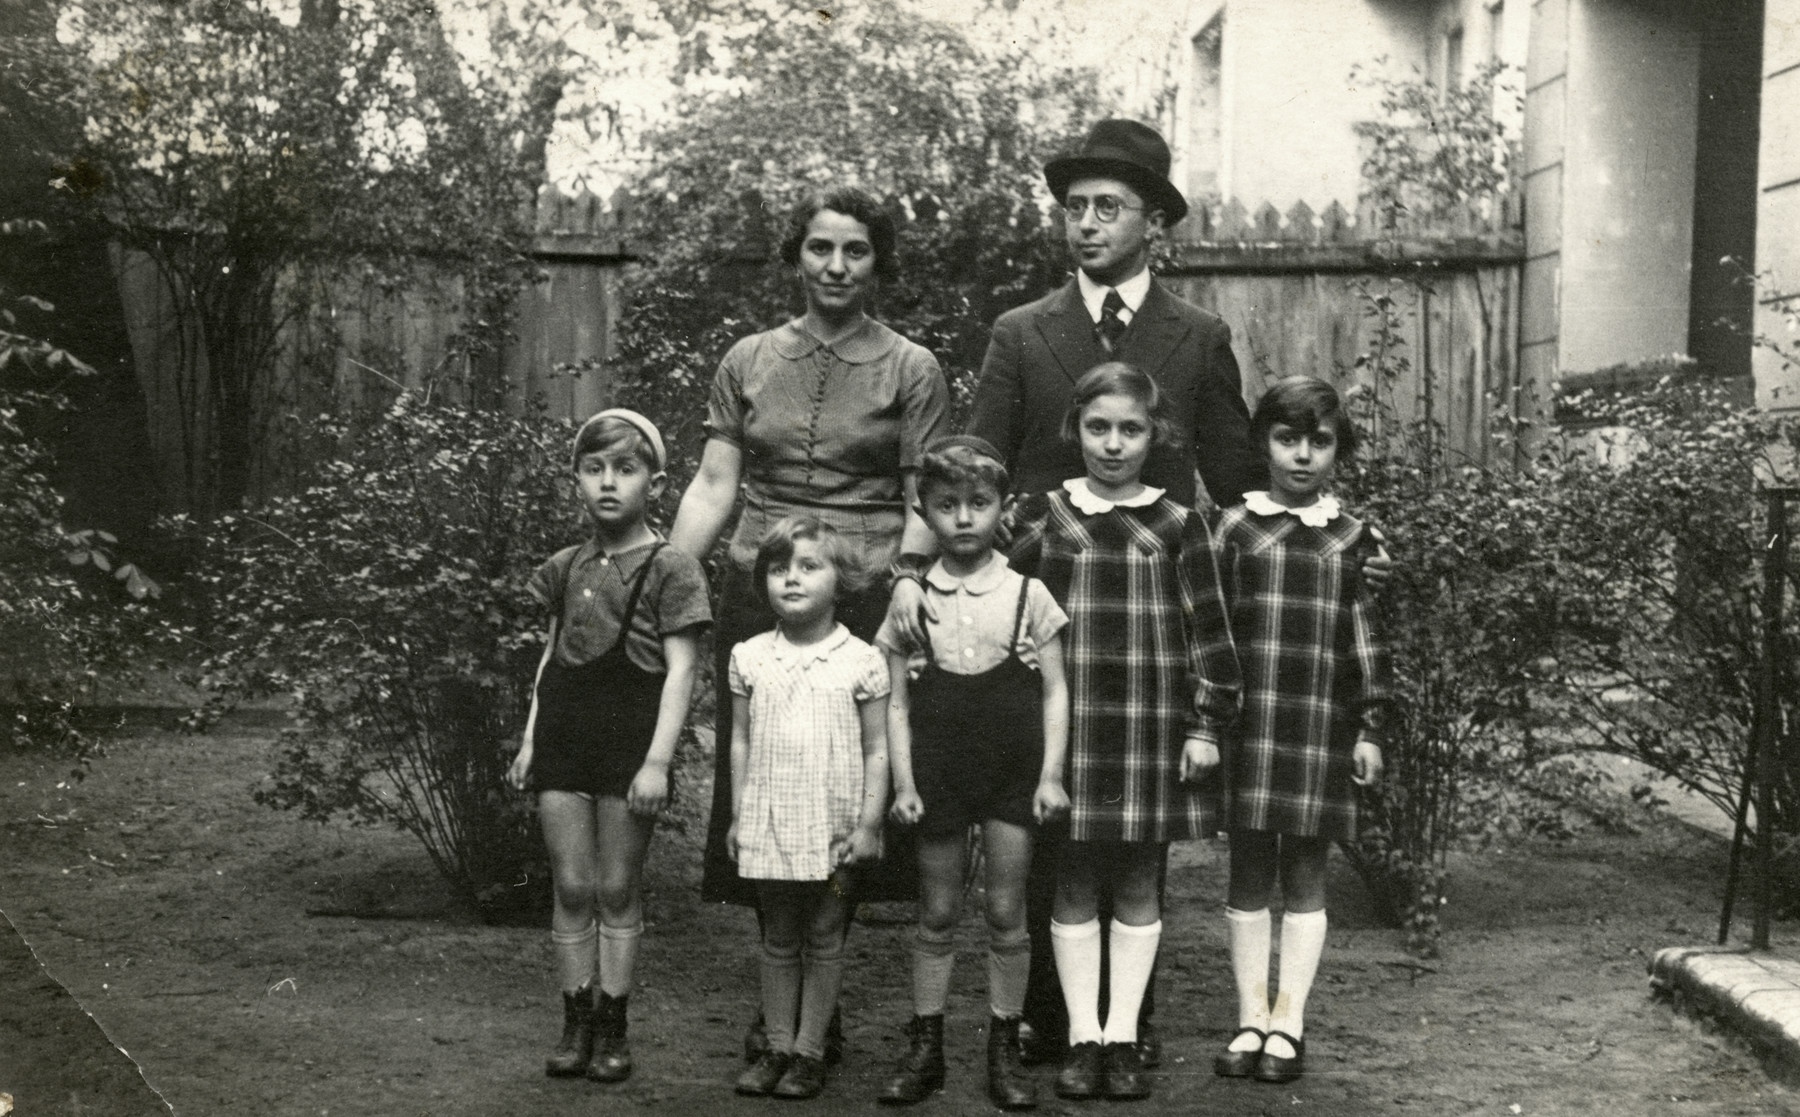 The Birnbaum family poses in a garden while on vacation near Berlin.

From left to right are Yaakov, Susy, Zvi, Sonni and Regina.  Hennie and Yehoshua are standing behind them.